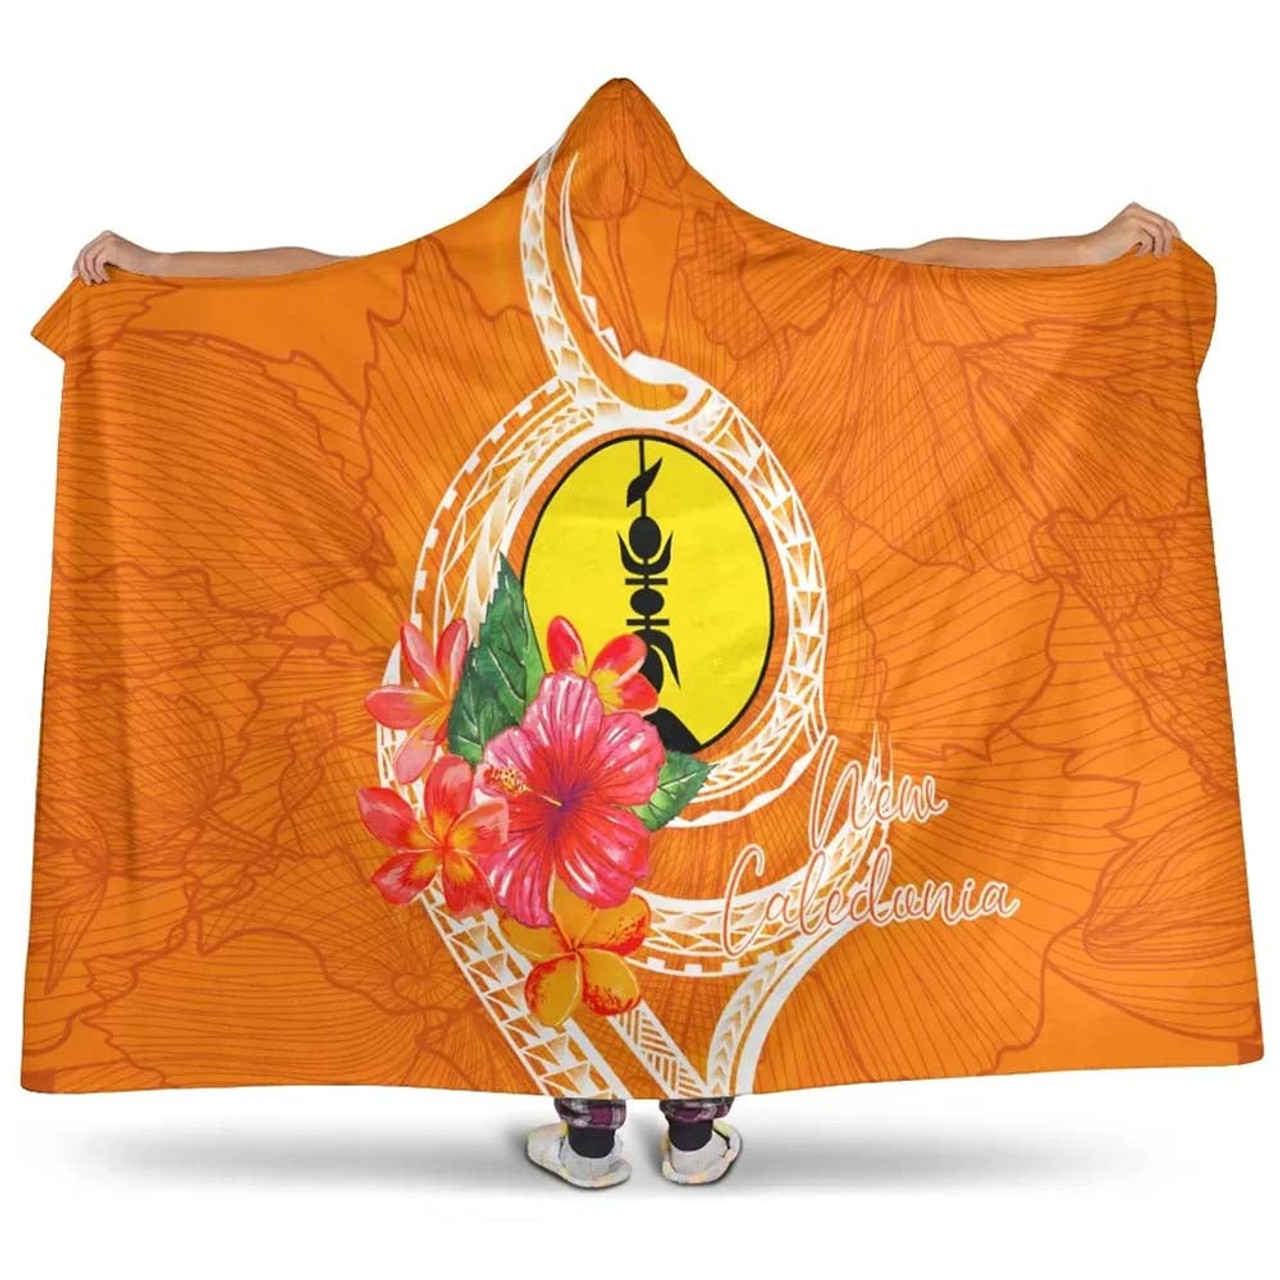 New Caledonia Polynesian Hooded Blanket - Orange Floral With Seal 1